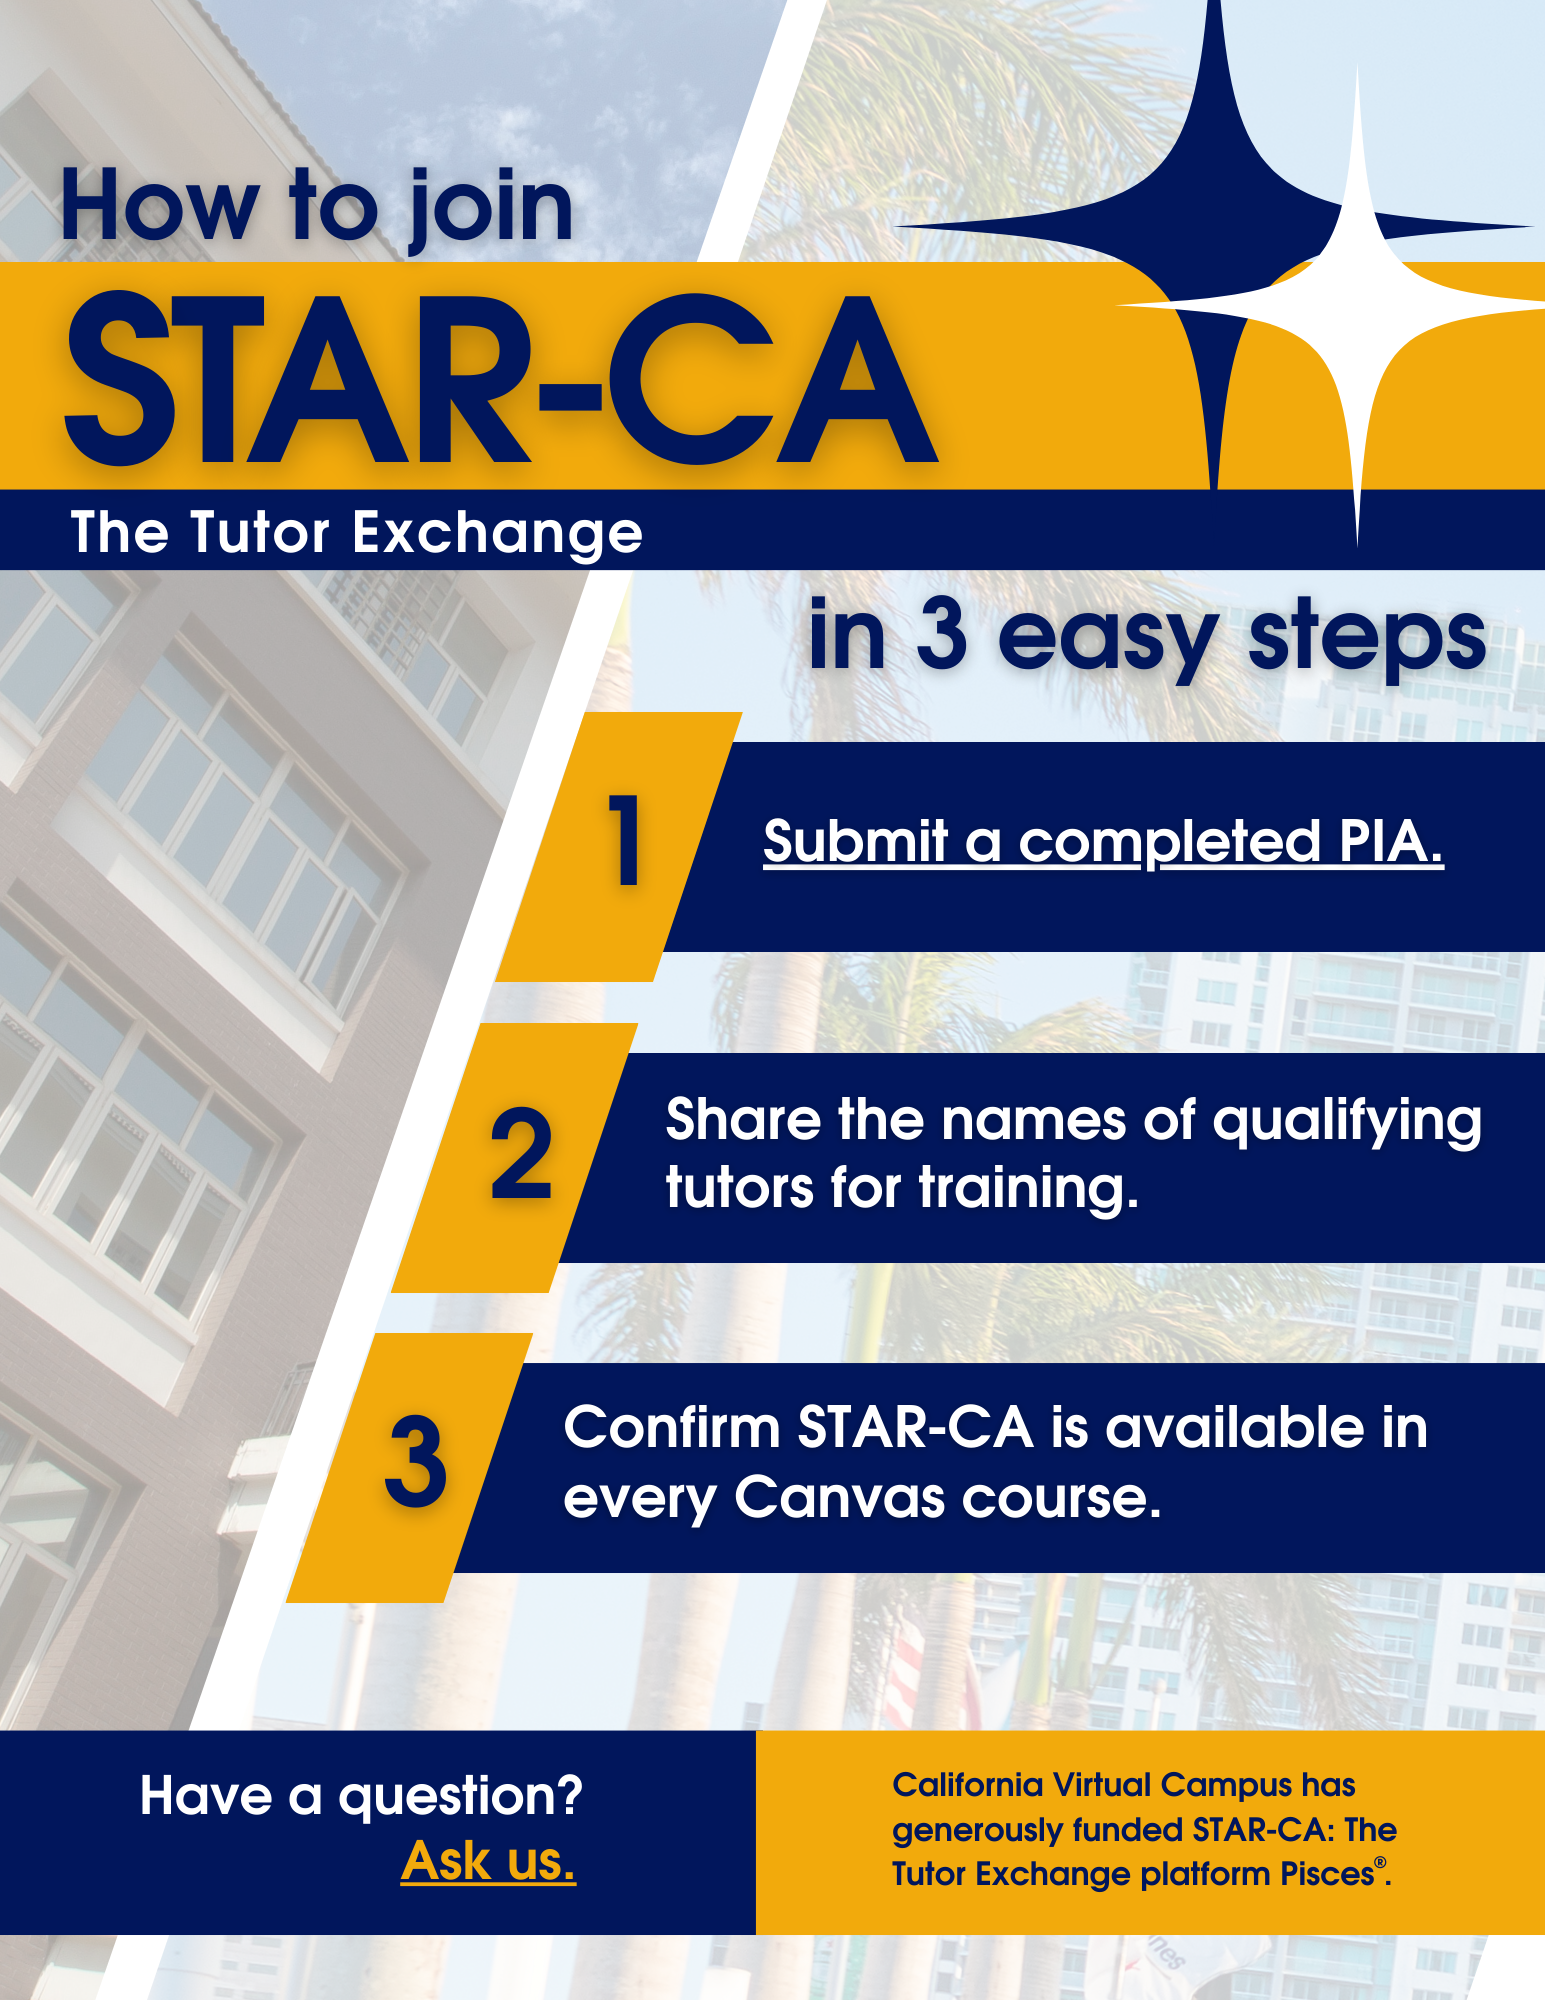 An image detailing the three basic steps to joining the STAR-CA Consortium. Step 1: Submit a completed PIA. Step 2: Share the names of qualifiying tutors for training. Step 3: Confirm STAR-CA is available in every Canvas course. California Virtual Campus has generously funded the STAR-CA platform Pisces.